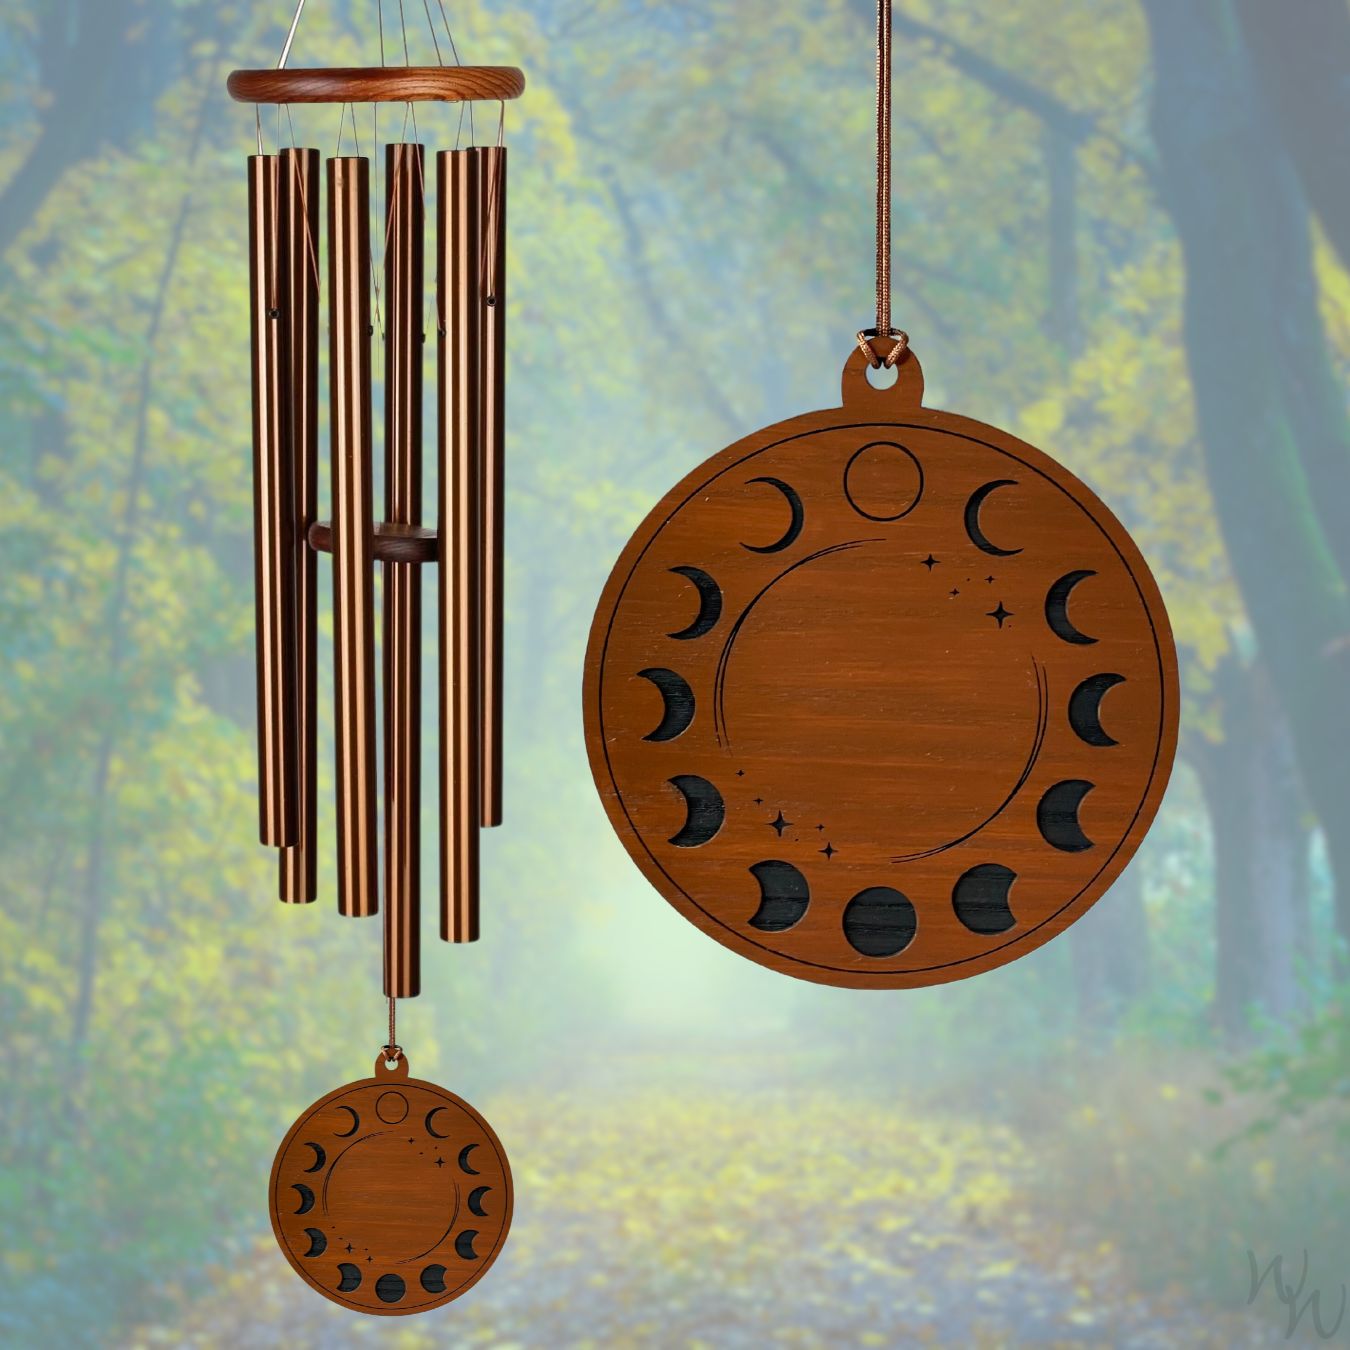 Amazing Grace 40 Inch Wind Chime - Engravable Moon Phase Sail - Bronze